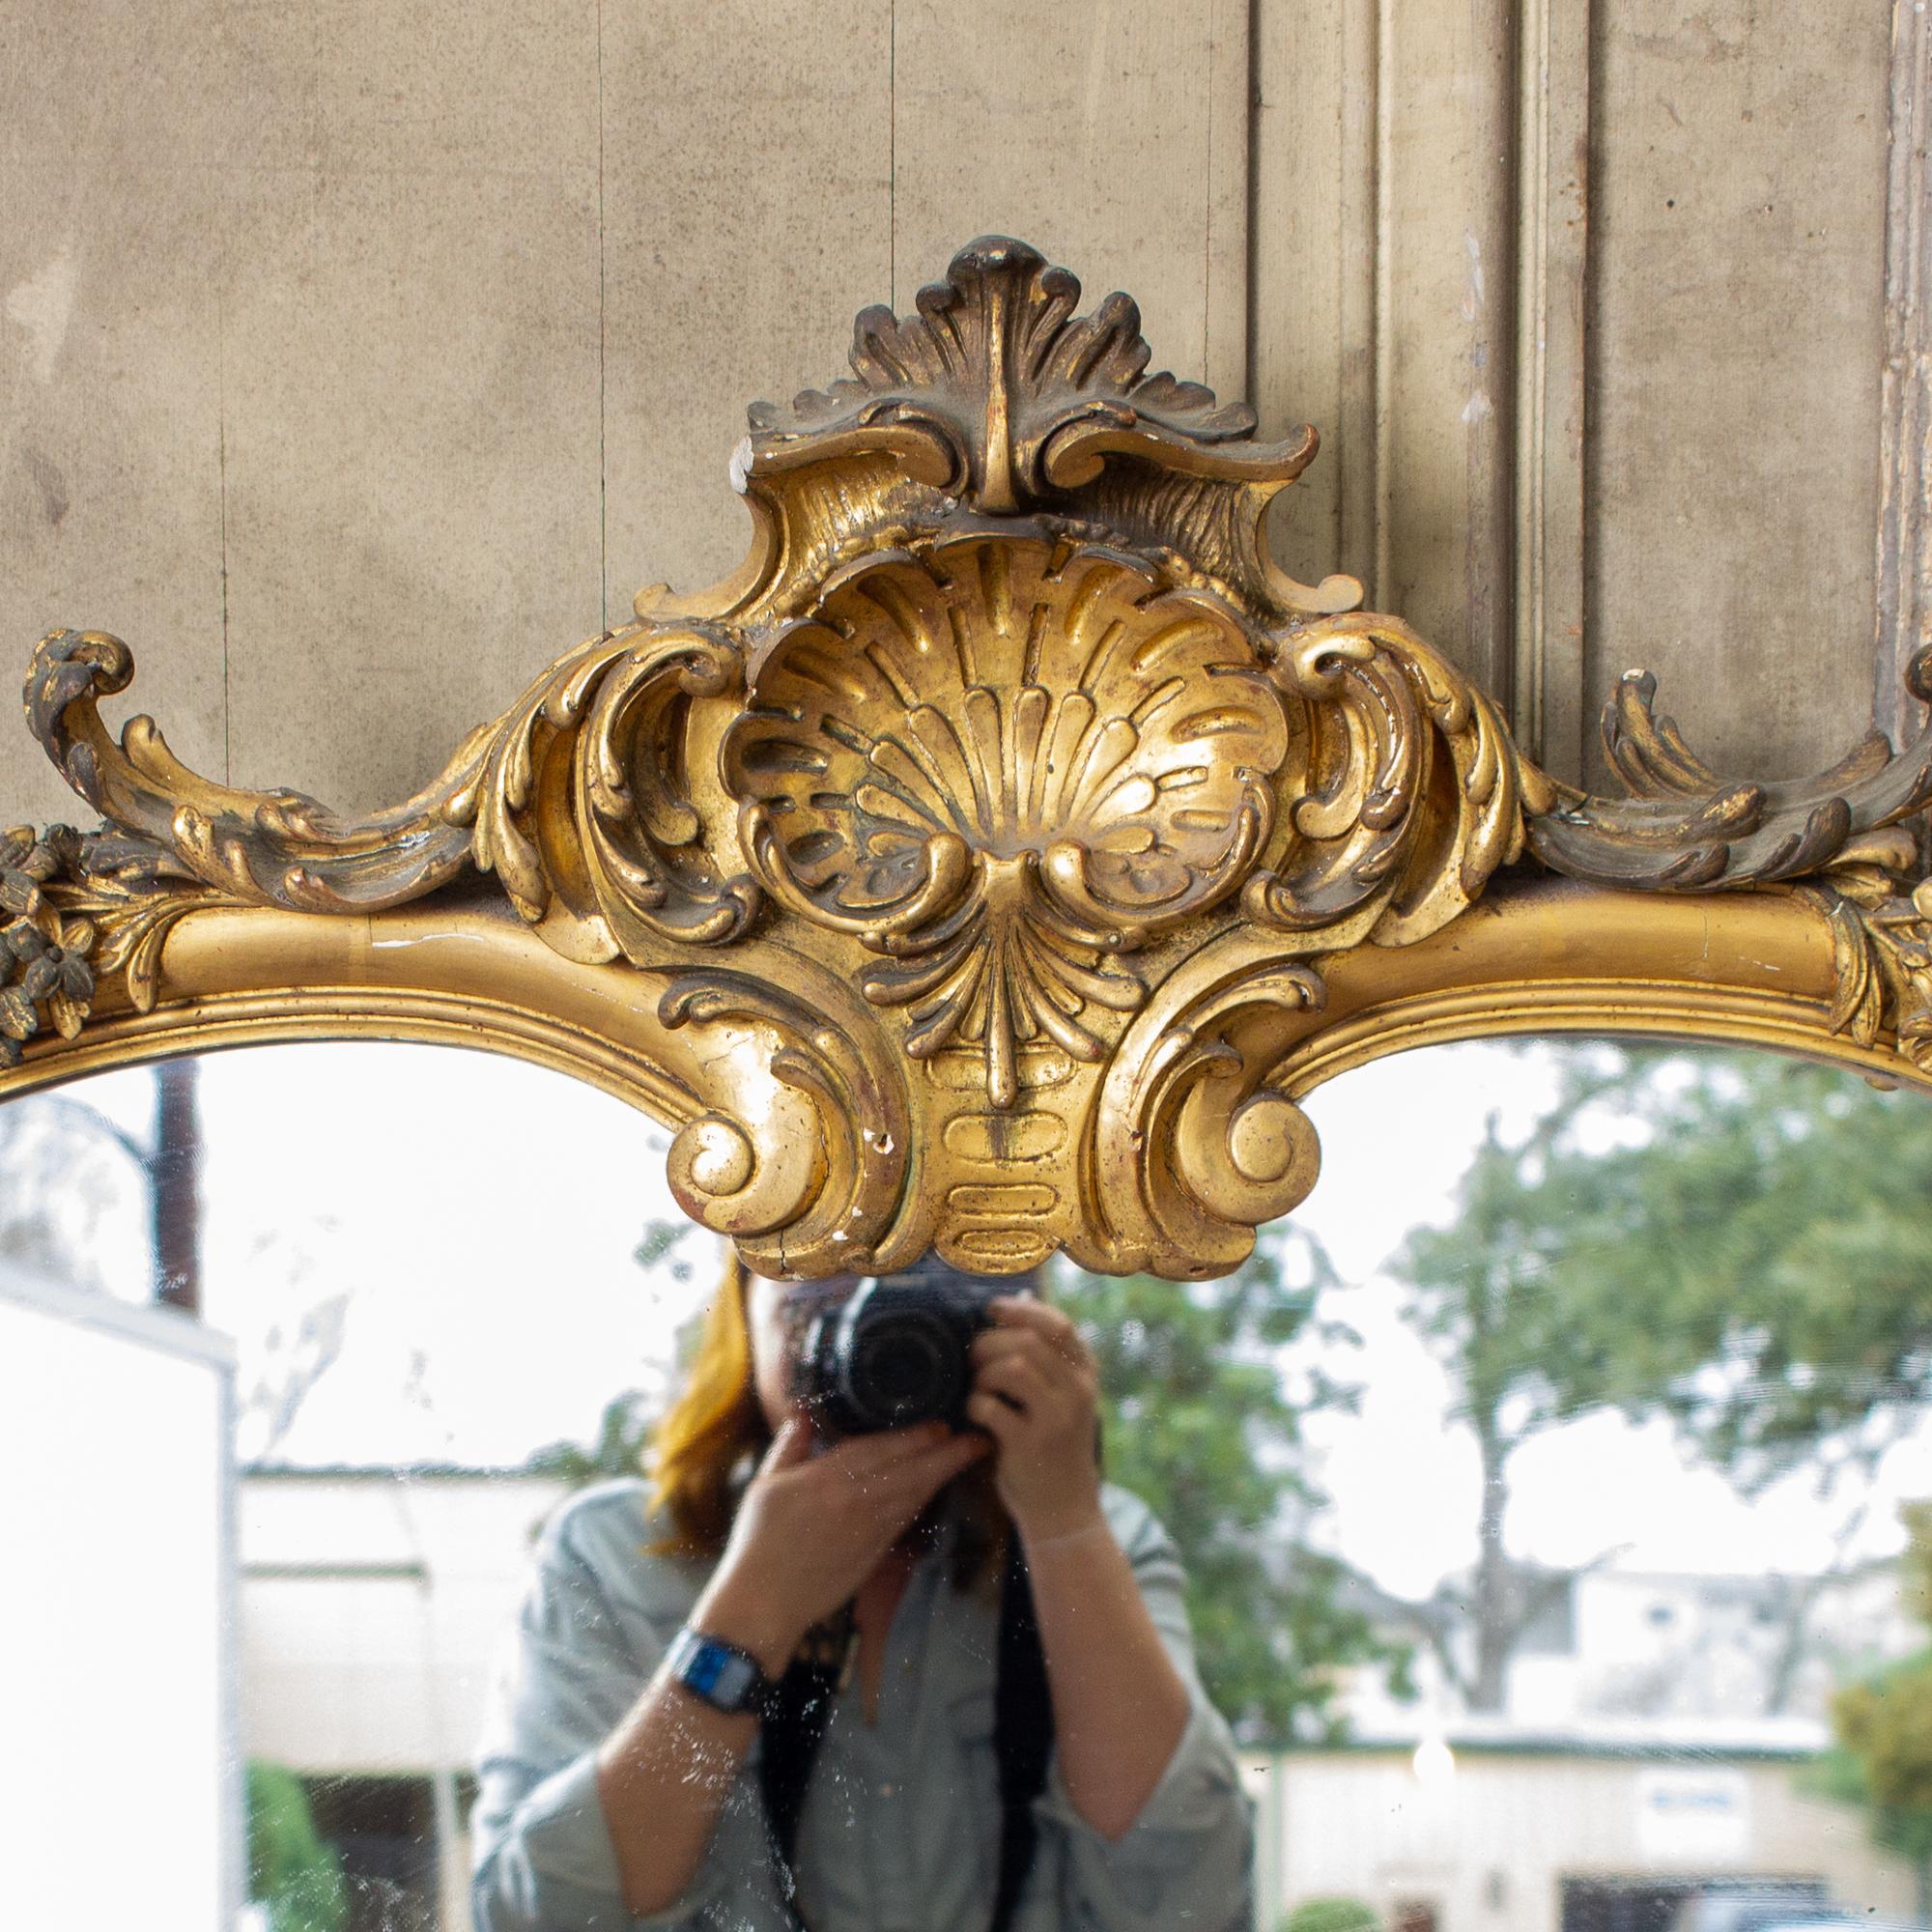 Rococo Antique Gilt Full-Length Mirror with Decorative Carvings and Shell Cartouche